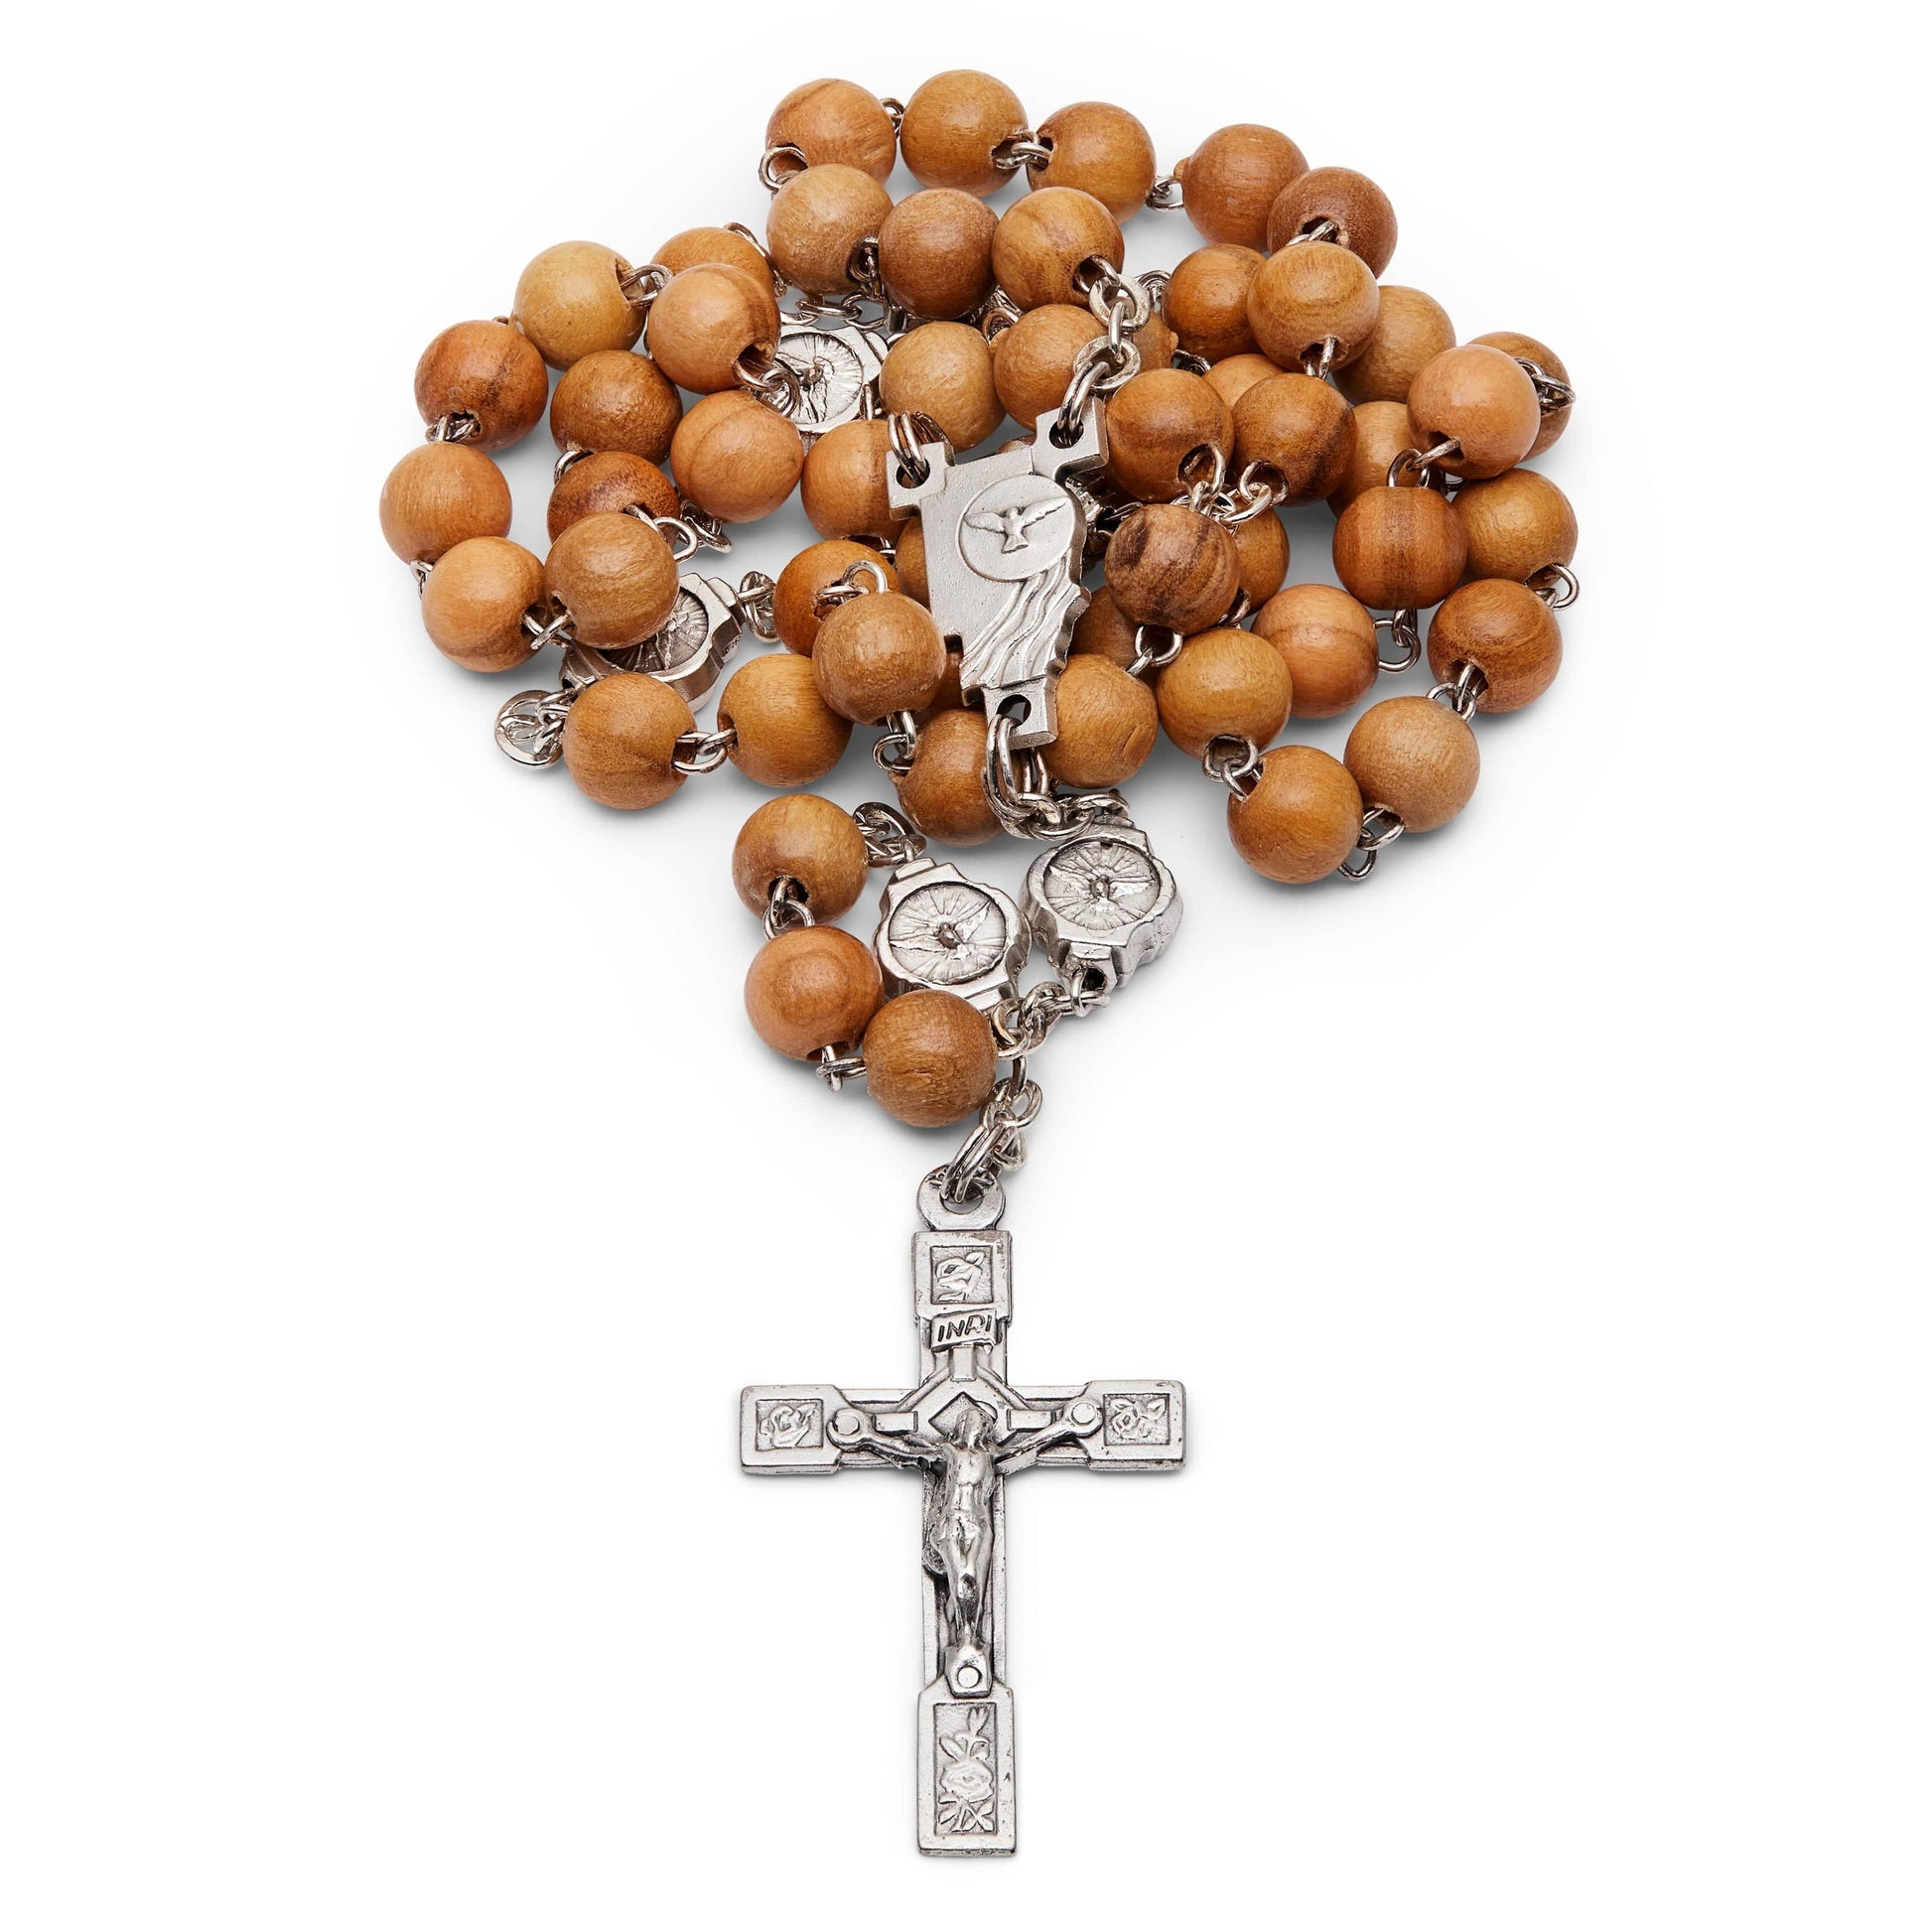 MONDO CATTOLICO Prayer Beads 49 cm (19.29 in) / 6 mm (0.23 in) Confirmation Rosary in Olive Wood Beads and Holy Spirit Center Medal